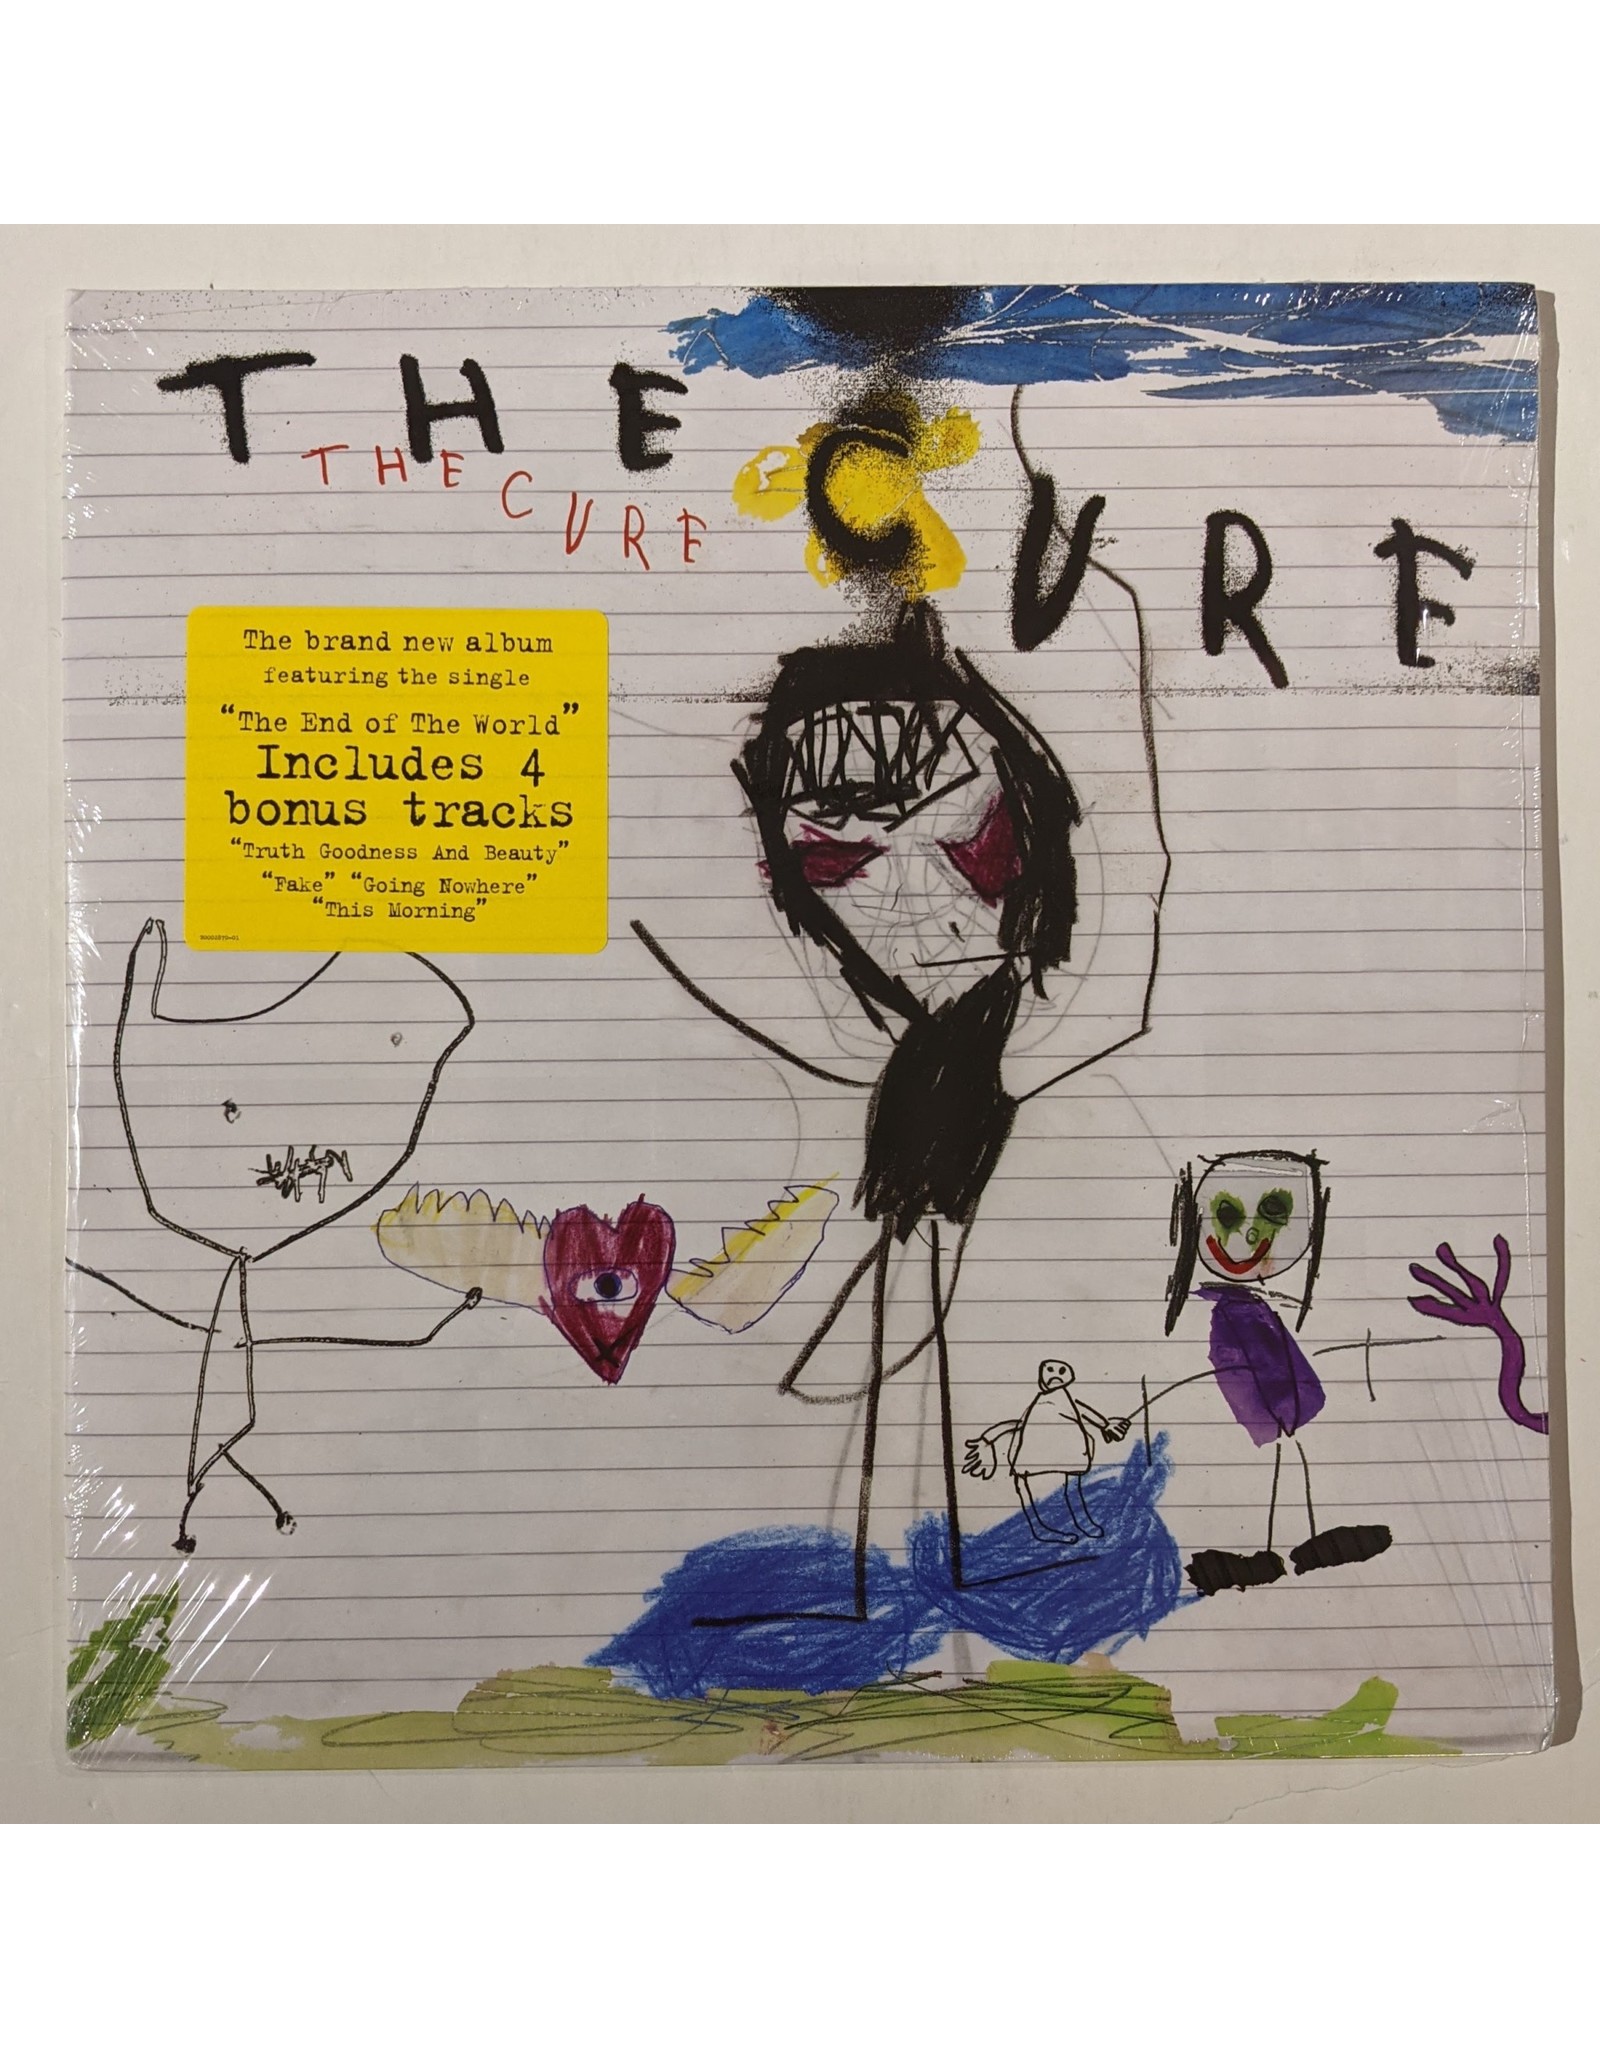 USED: The Cure: s/t LP